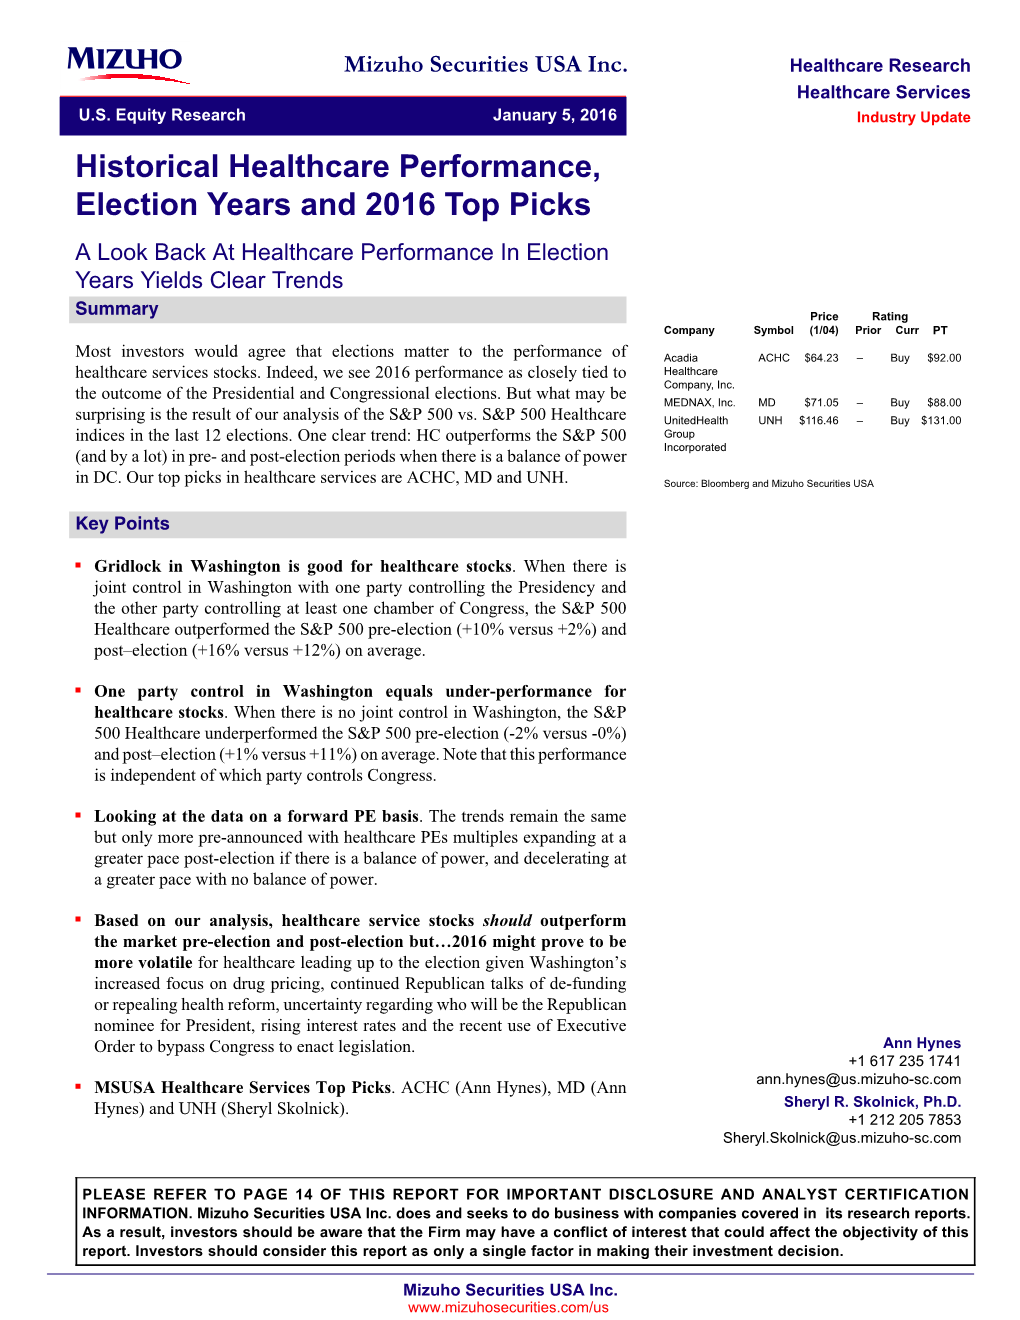 Historical Healthcare Performance, Election Years and 2016 Top Picks a Look Back at Healthcare Performance in Election